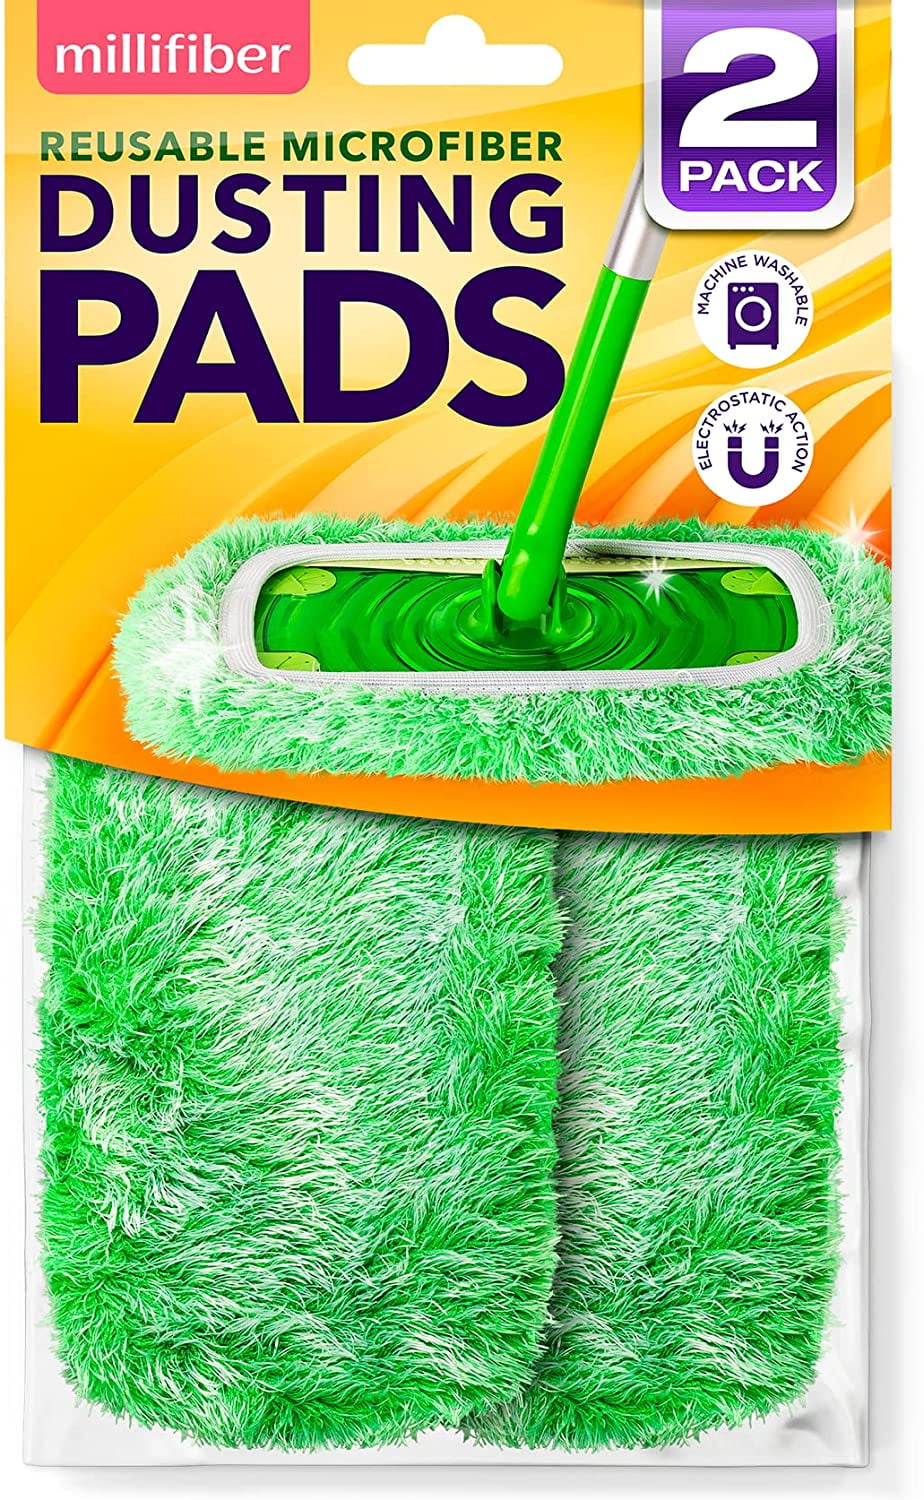 2Pack Reusable Pads Compatible with Swiffer Sweeper Mops Washable Microfiber Mop Pad Refills for Multi Surfaces Wet & Dry Household Cleaning, Size